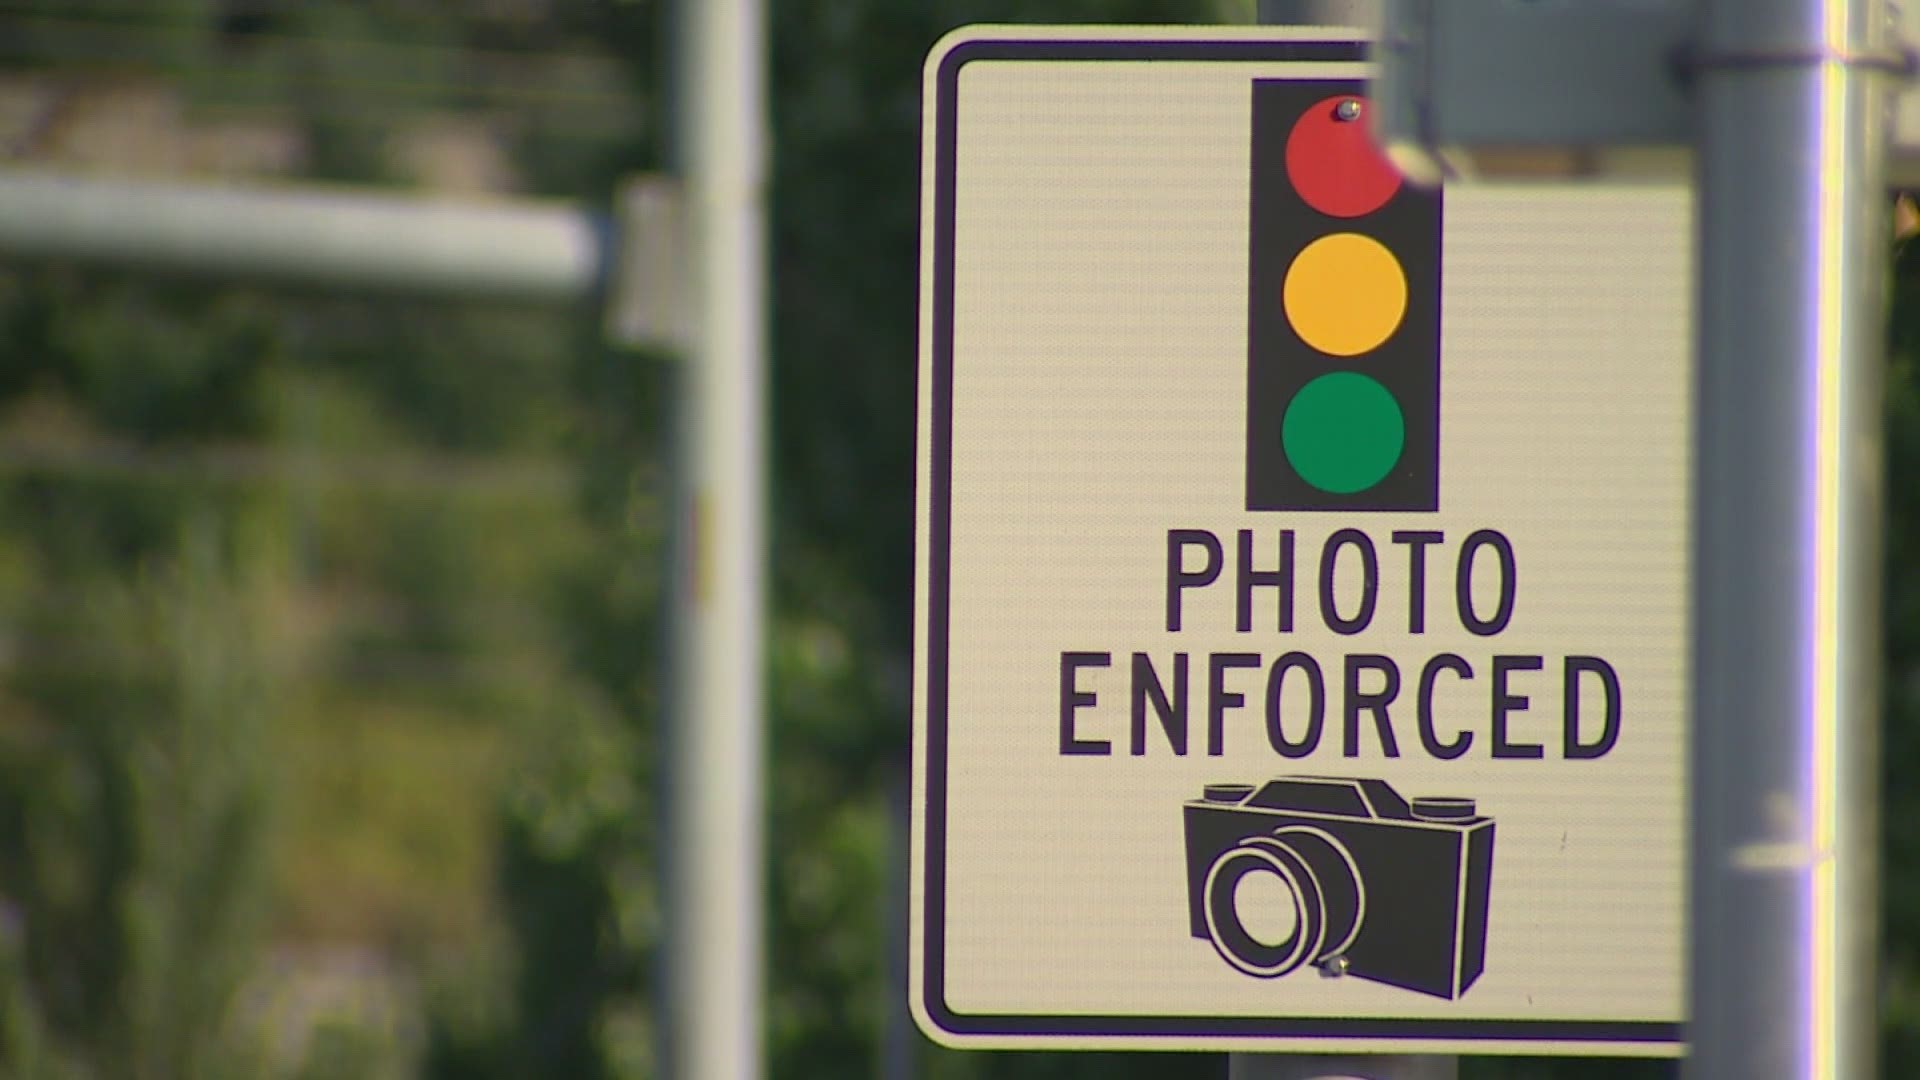 Renton police are warning drivers of a scam that tricks them into paying fake red-light camera tickets.